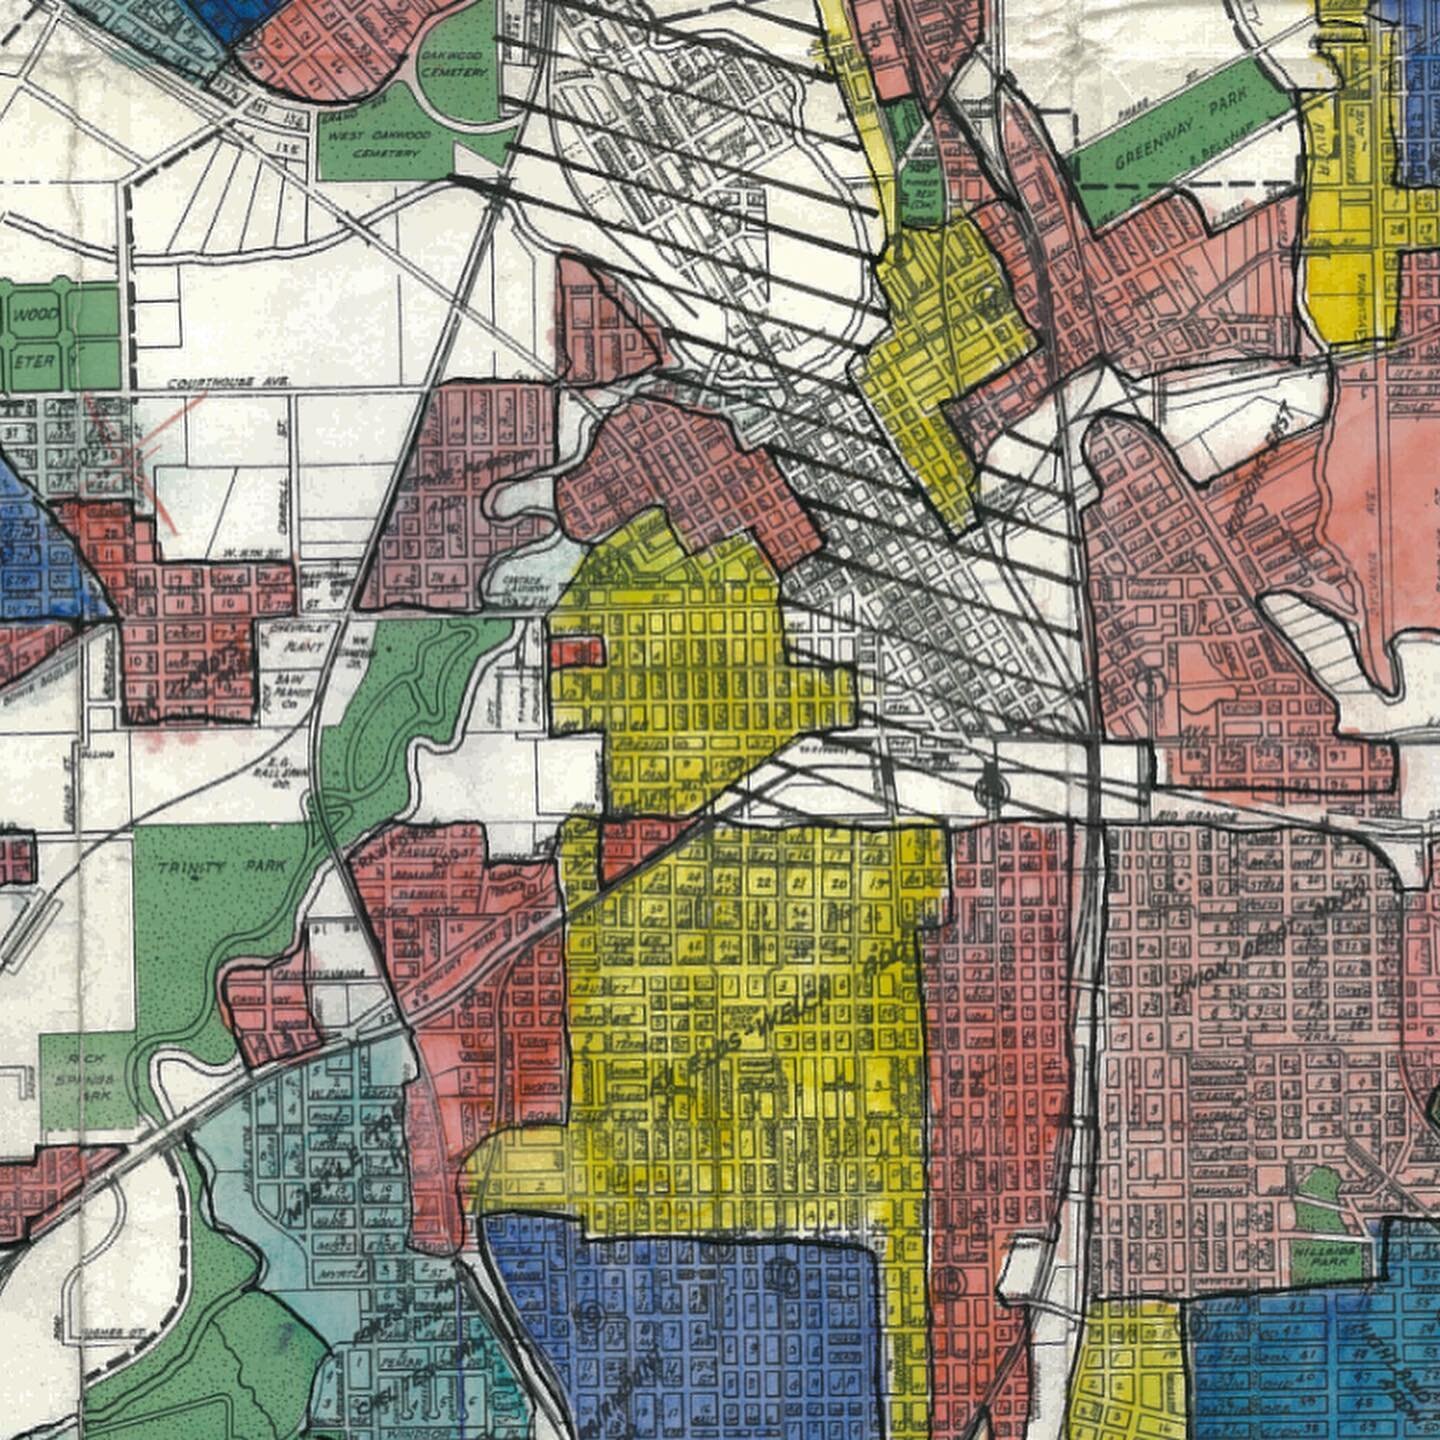 Reading about redlining in Chicago a few years ago in Ta-nehisi Coates&rsquo; article &lsquo;The Case for Reparations&rsquo; made me curious to see the HOLC redlining map for Fort Worth. While many other Texas cities&rsquo; maps were easily found via